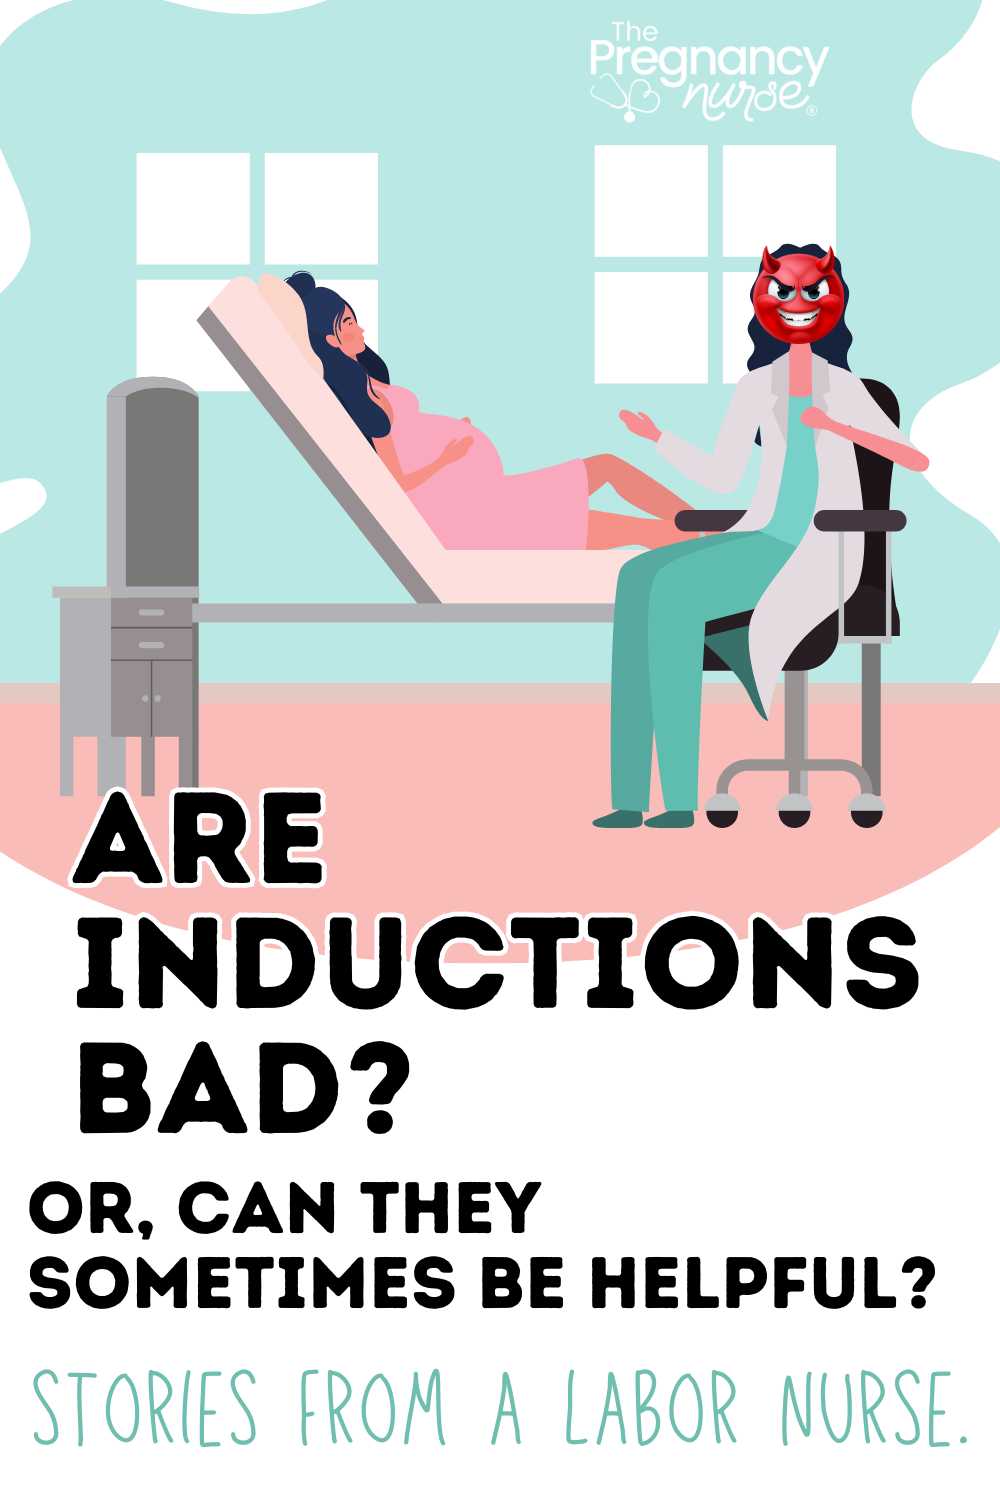 Pregnant woman in the hospital with a devil doctor. / Are inductions bad or can they sometimes be helpful? Stories from a labor nurse.